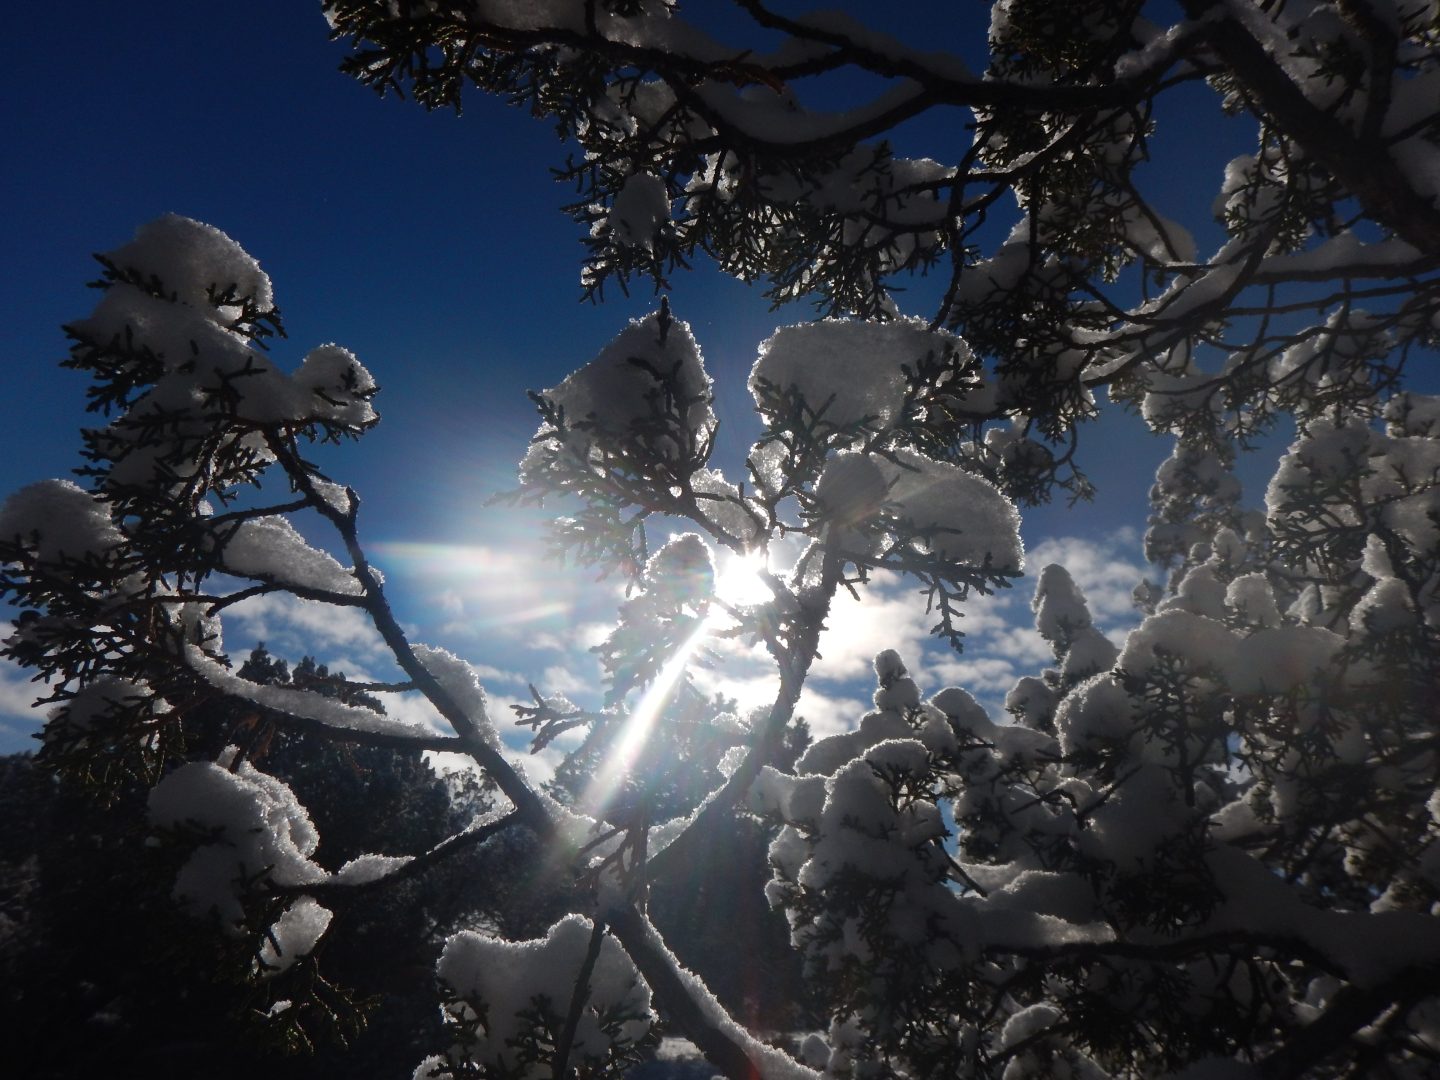 Snow melting on tree branches as the sun shines through in the background at El Morro National Monument.